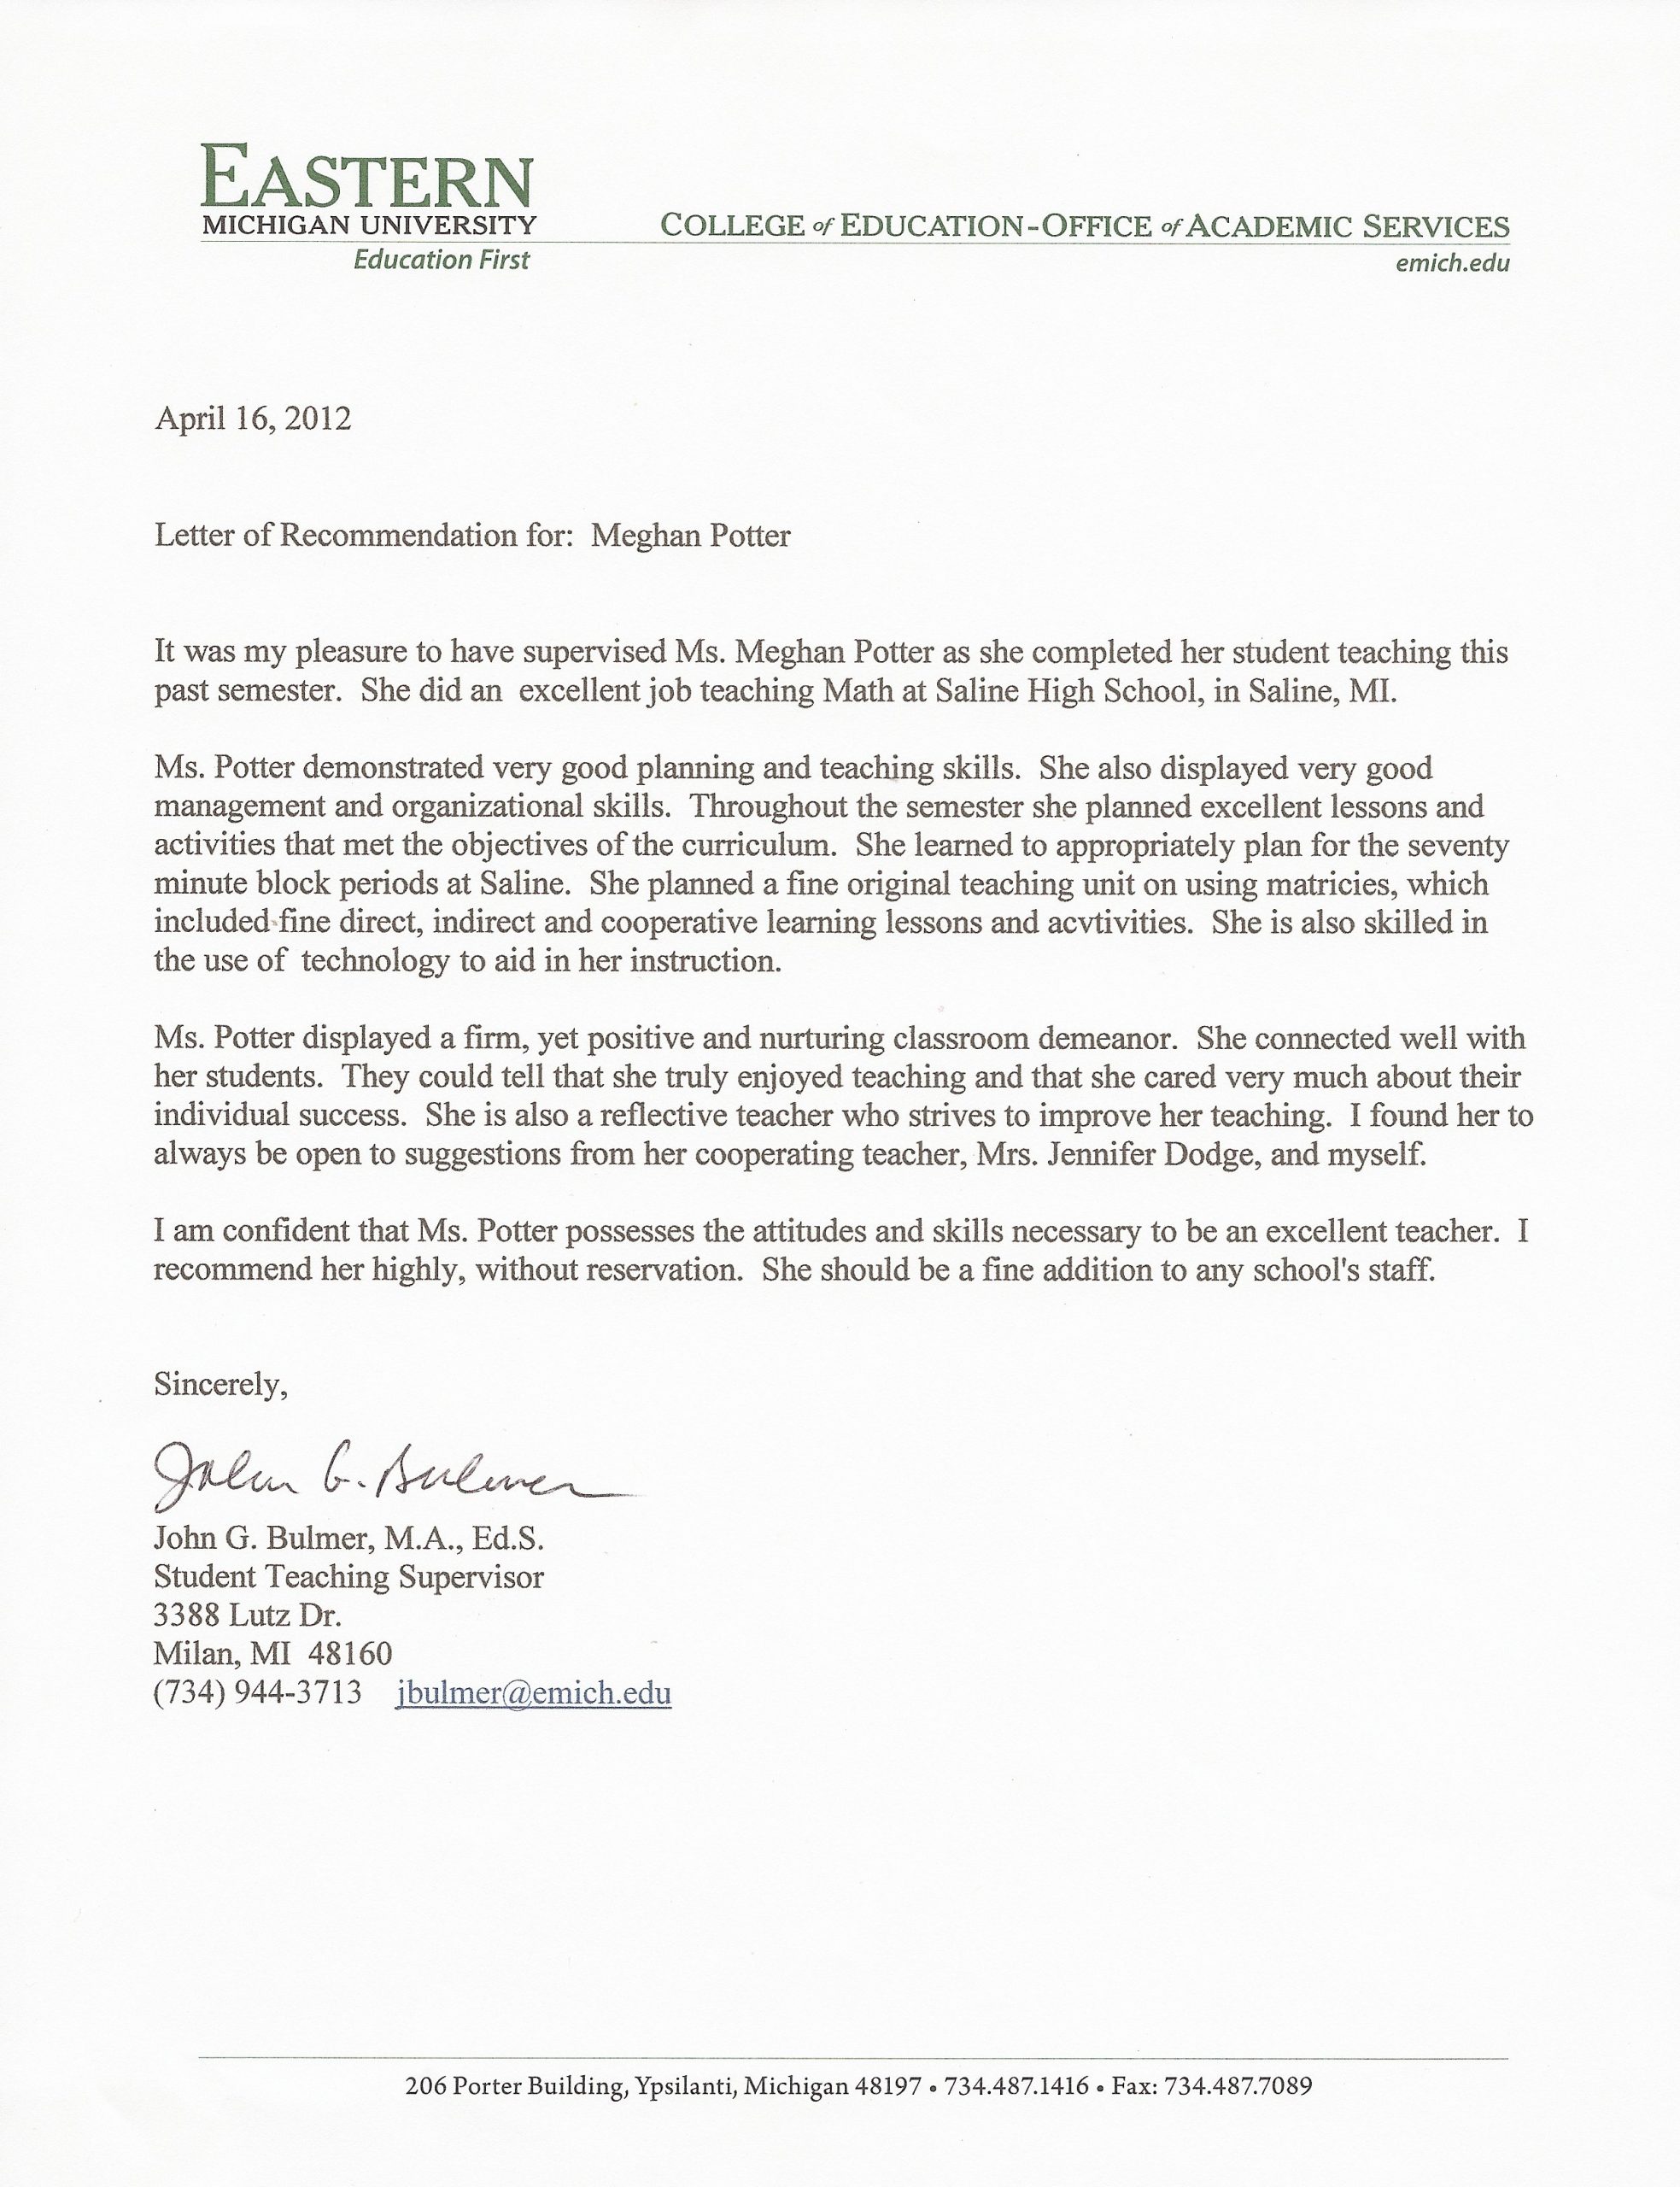 Sample Recommendation Letter For High School Student From within dimensions 2496 X 3248